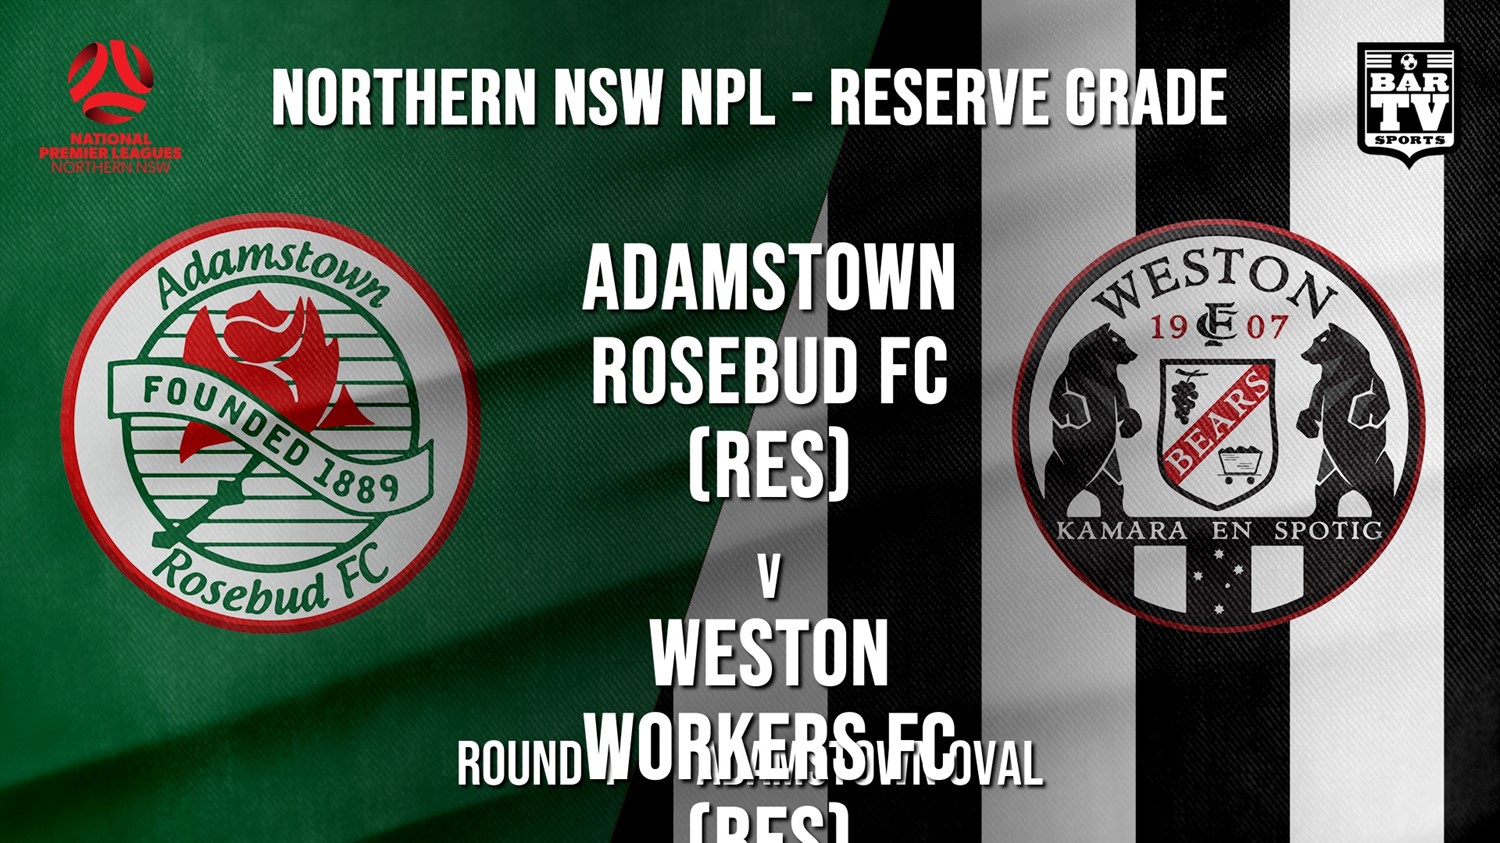 NPL NNSW RES Round 4 - Adamstown Rosebud FC (Res) v Weston Workers FC (Res) Minigame Slate Image